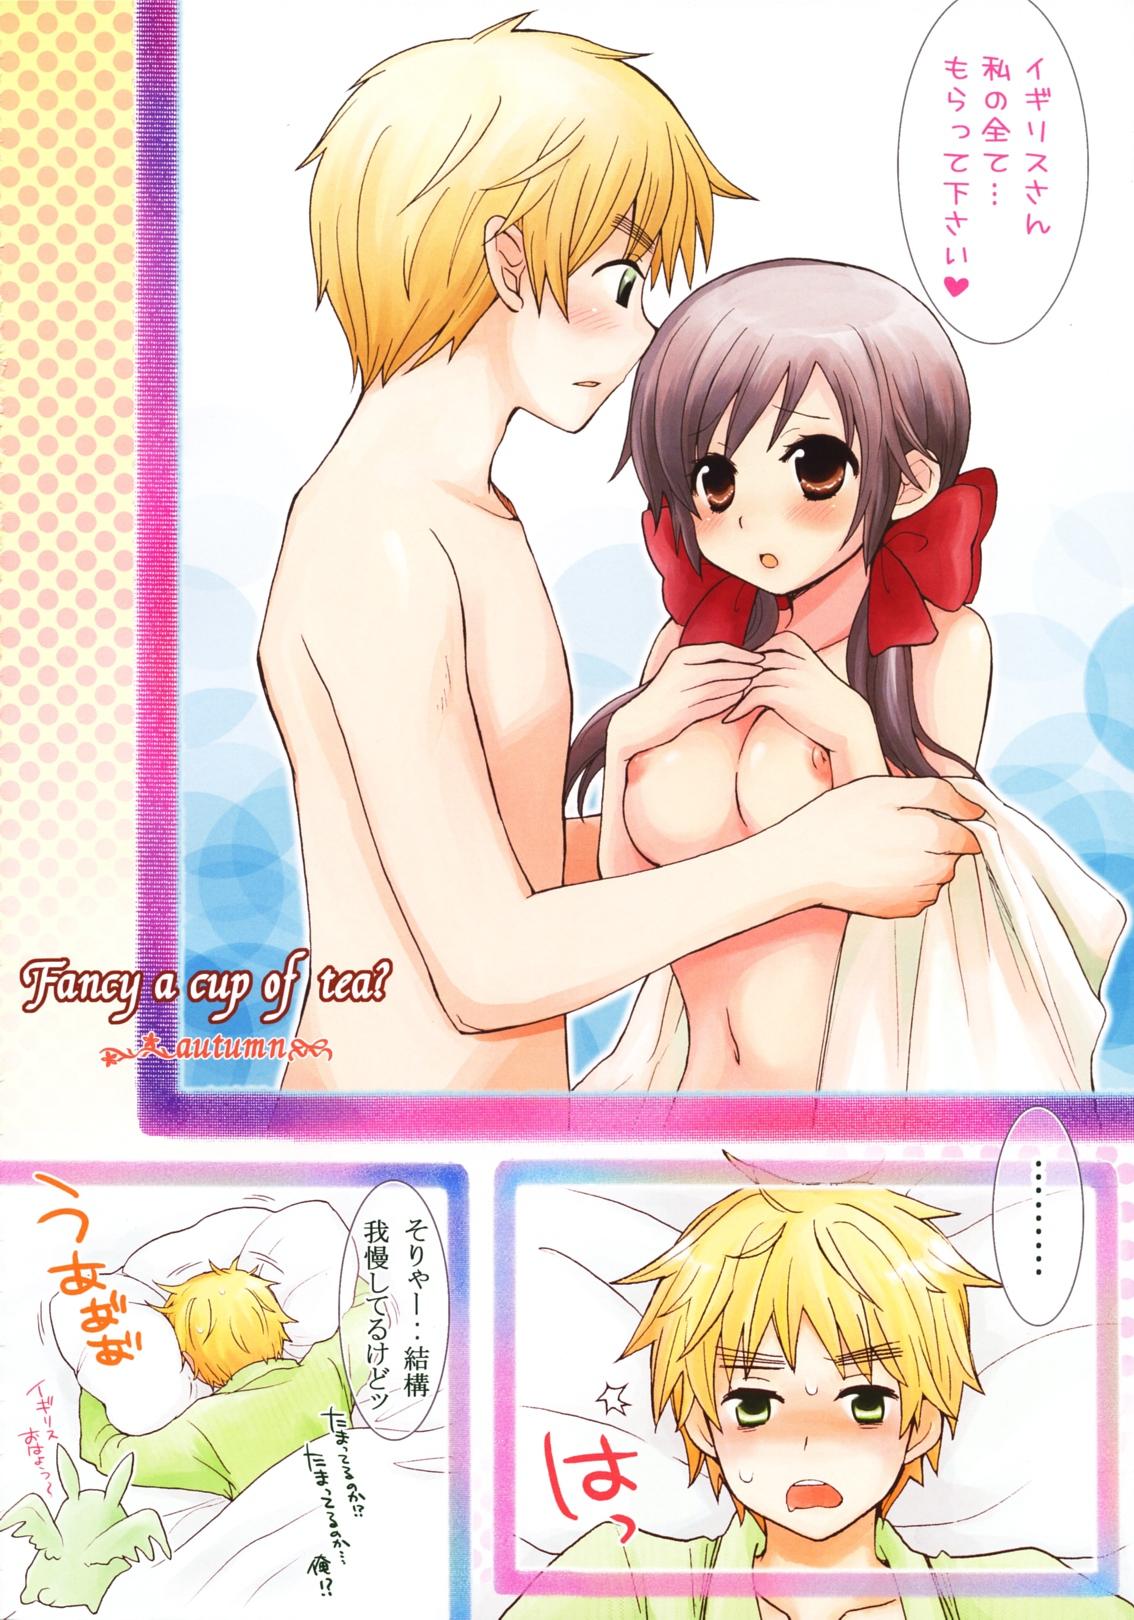 Fitness Fancy a cup of tea？ - Axis powers hetalia Sexo - Page 3